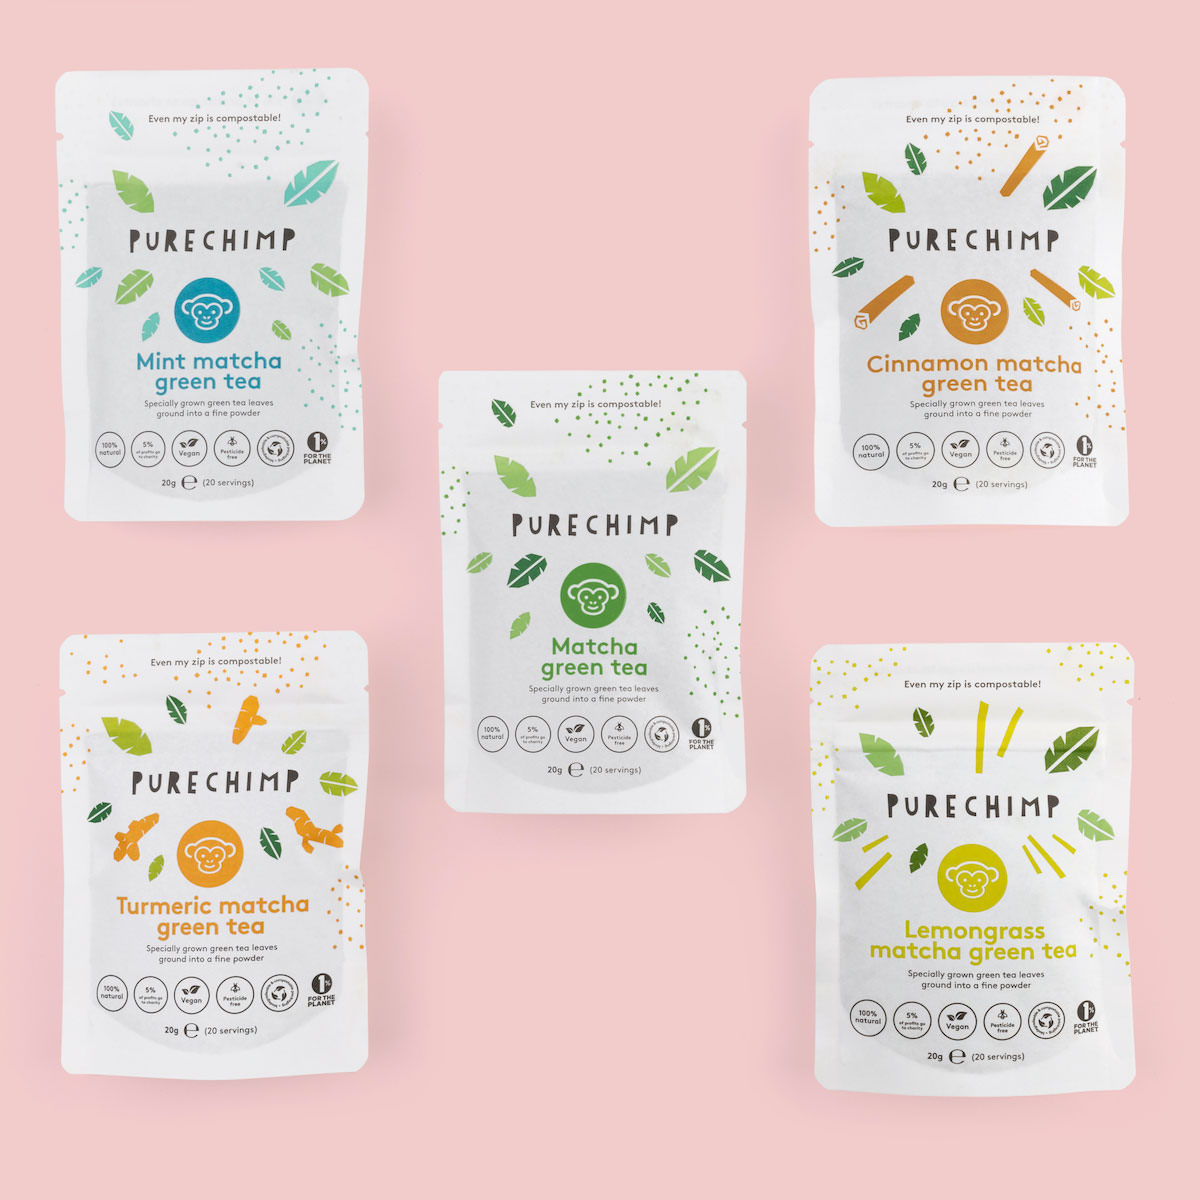 A selection of 5 matcha flavours offered by PureChimp against a pink background.